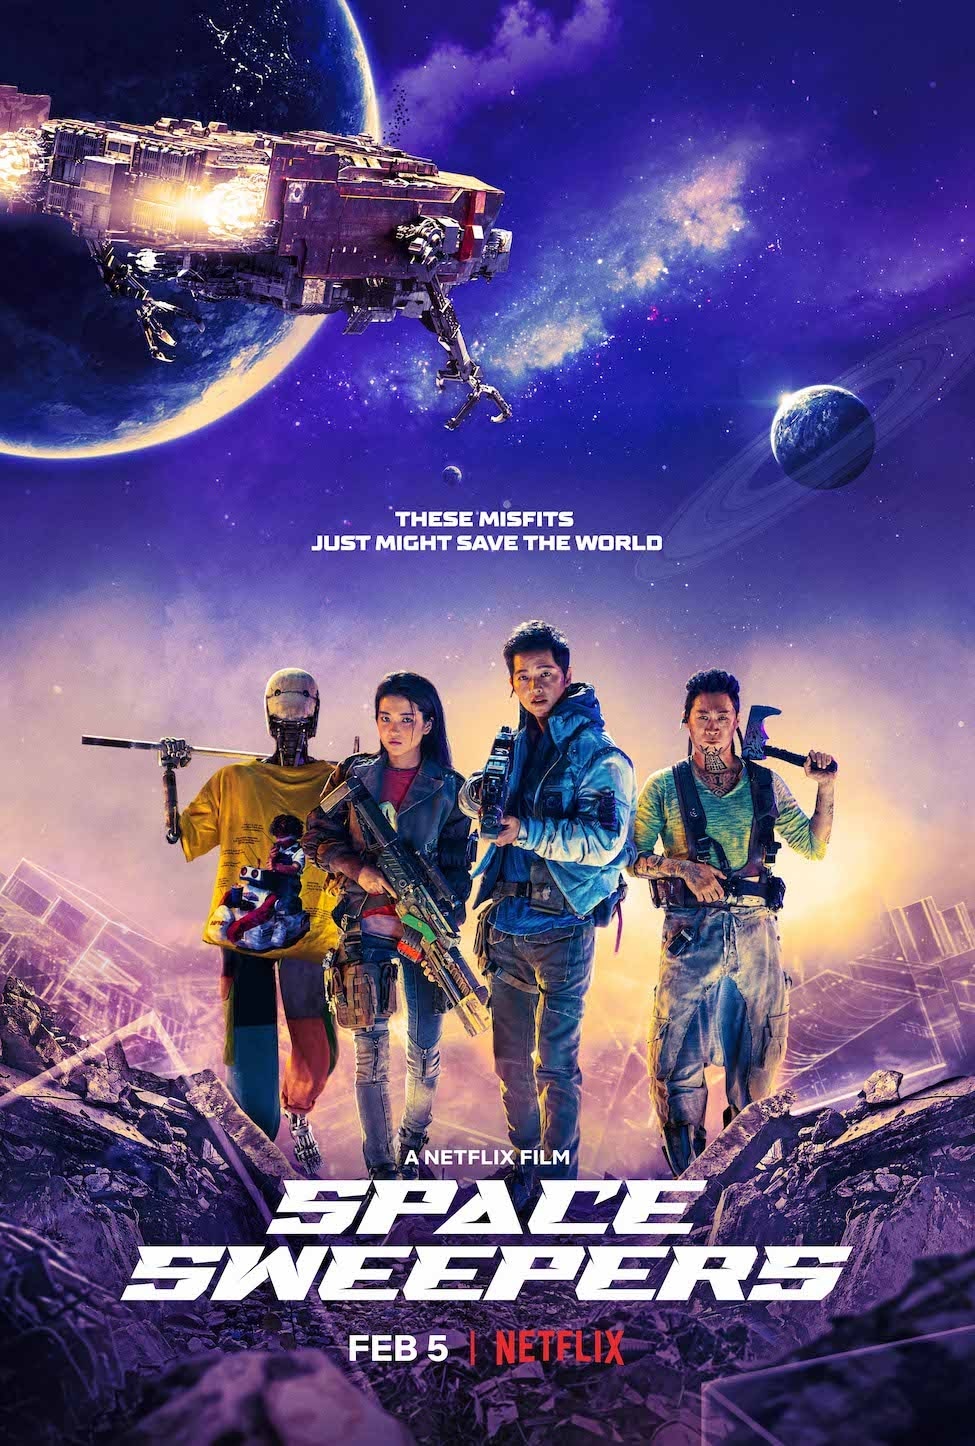 [Movie Review] Space Sweepers is a fun popcorn adventure with deeper themes